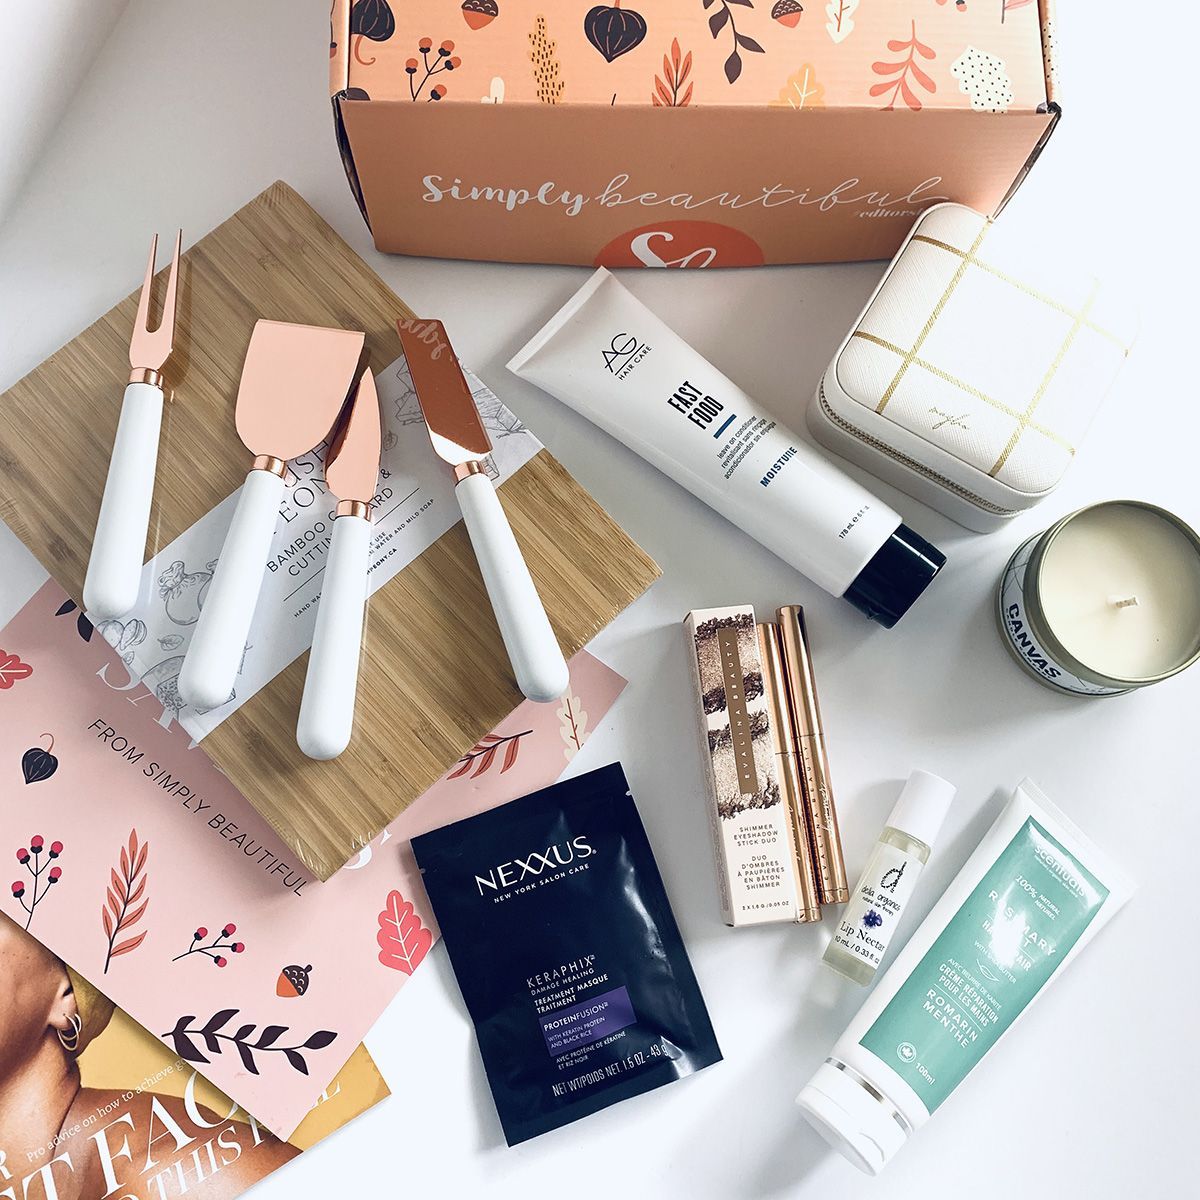 Simply Beautiful Editor's Unboxing Fall 2019 - Mind About Beauty - Simply Beautiful Editor's Unboxing Fall 2019 - Mind About Beauty -   18 beauty Box unboxing ideas